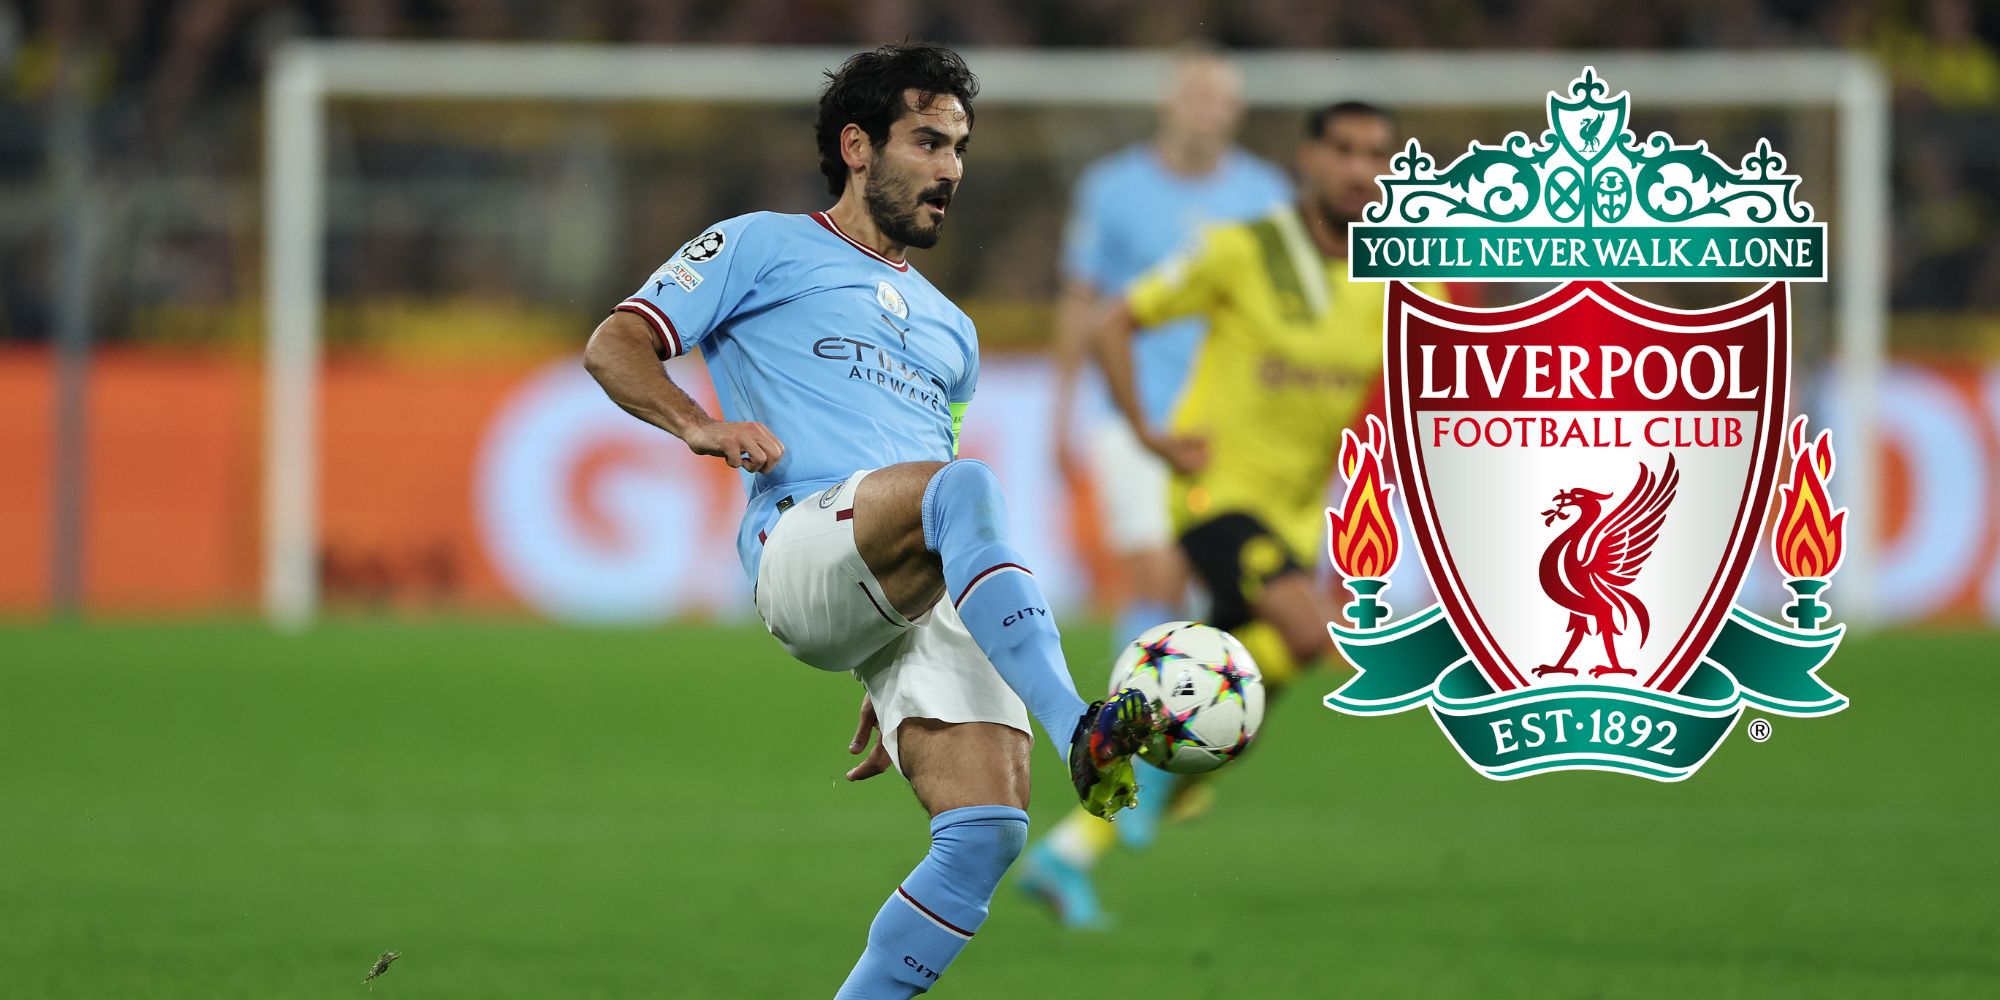 Ilkay Gundogan weighs in on possible Liverpool transfer once contract expires in 2023